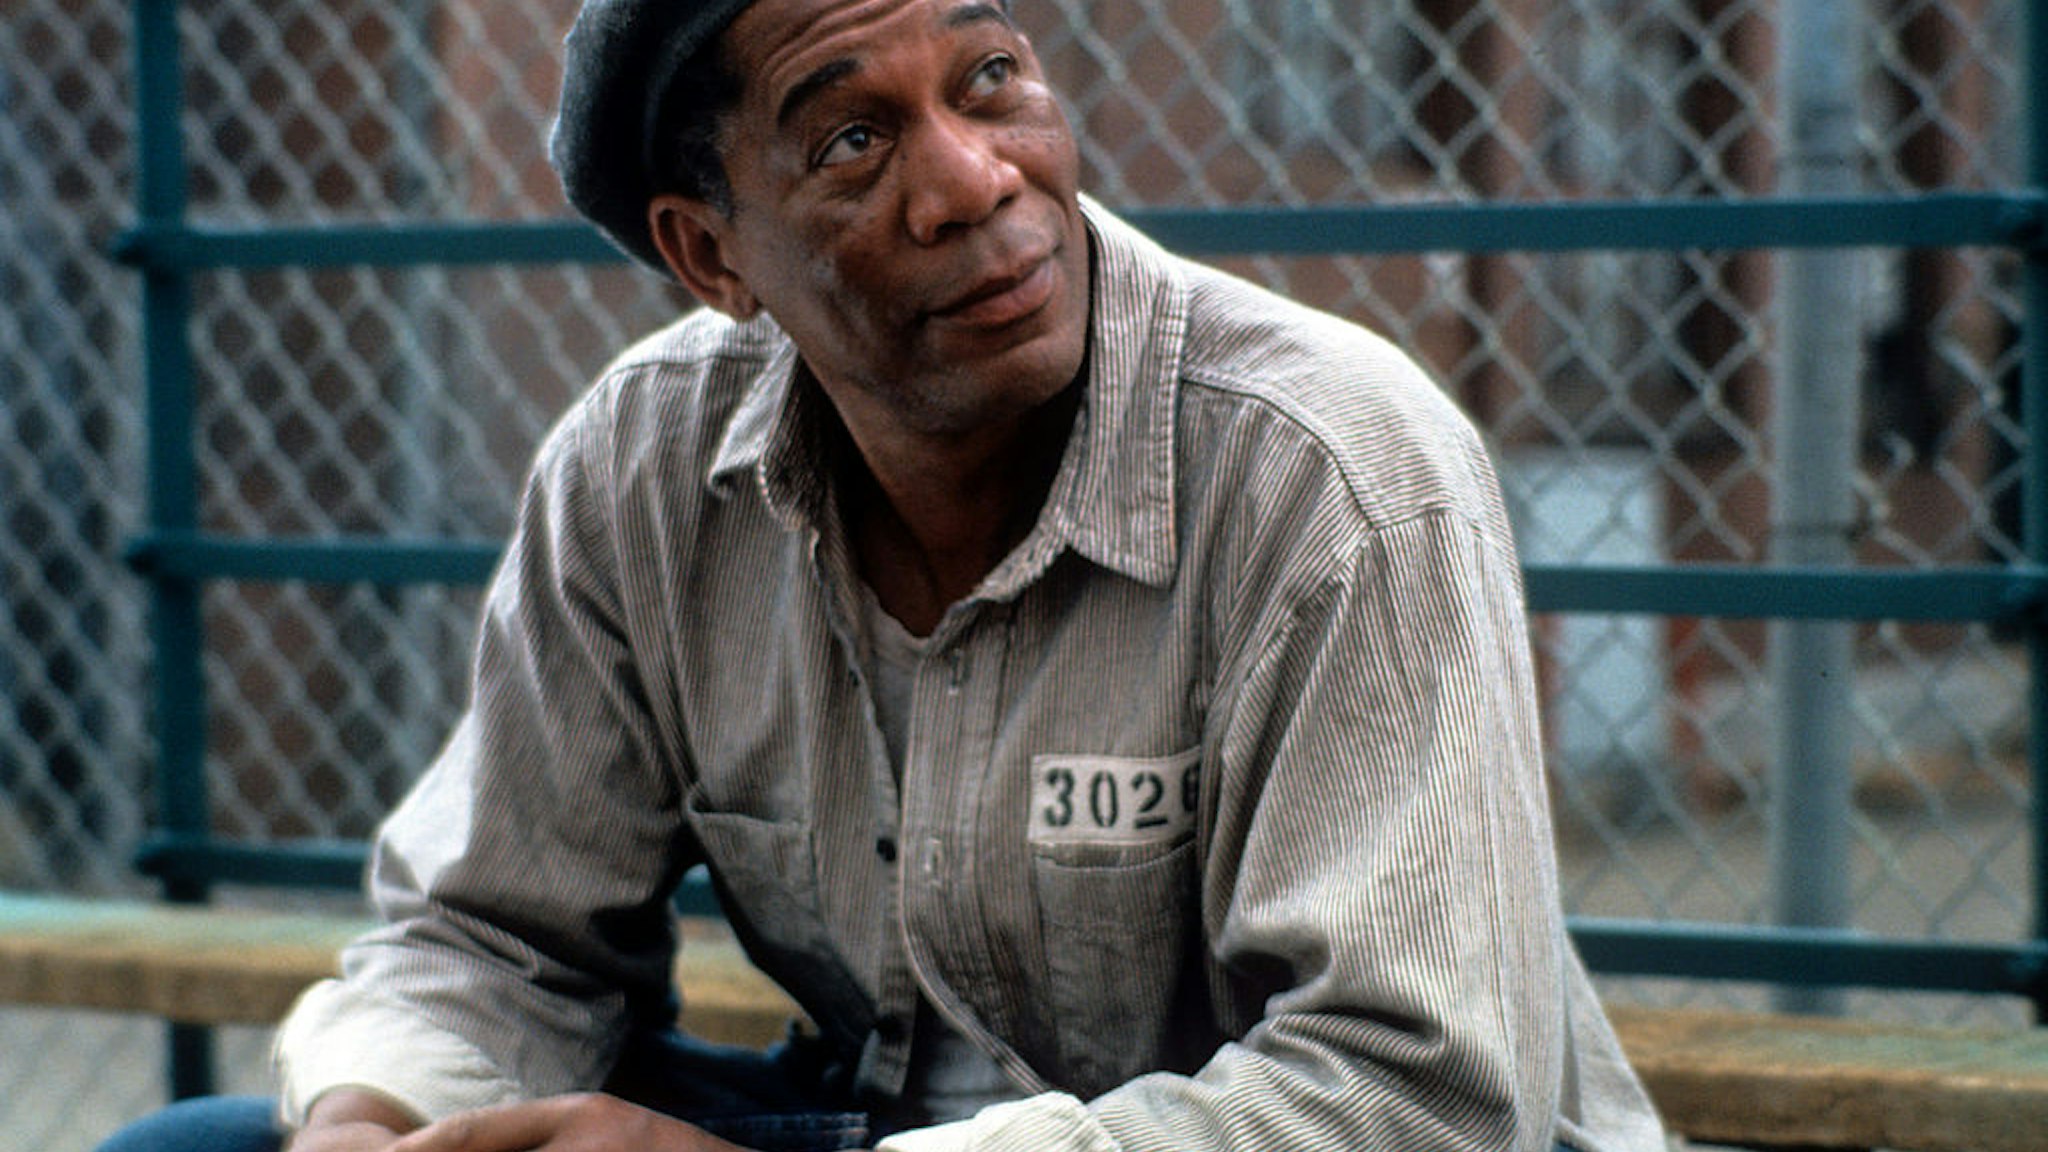 Morgan Freeman sitting outside with a hat and prison uniform on in a scene from the film 'The Shawshank Redemption', 1994. (Photo by Castle Rock Entertainment/Getty Images)